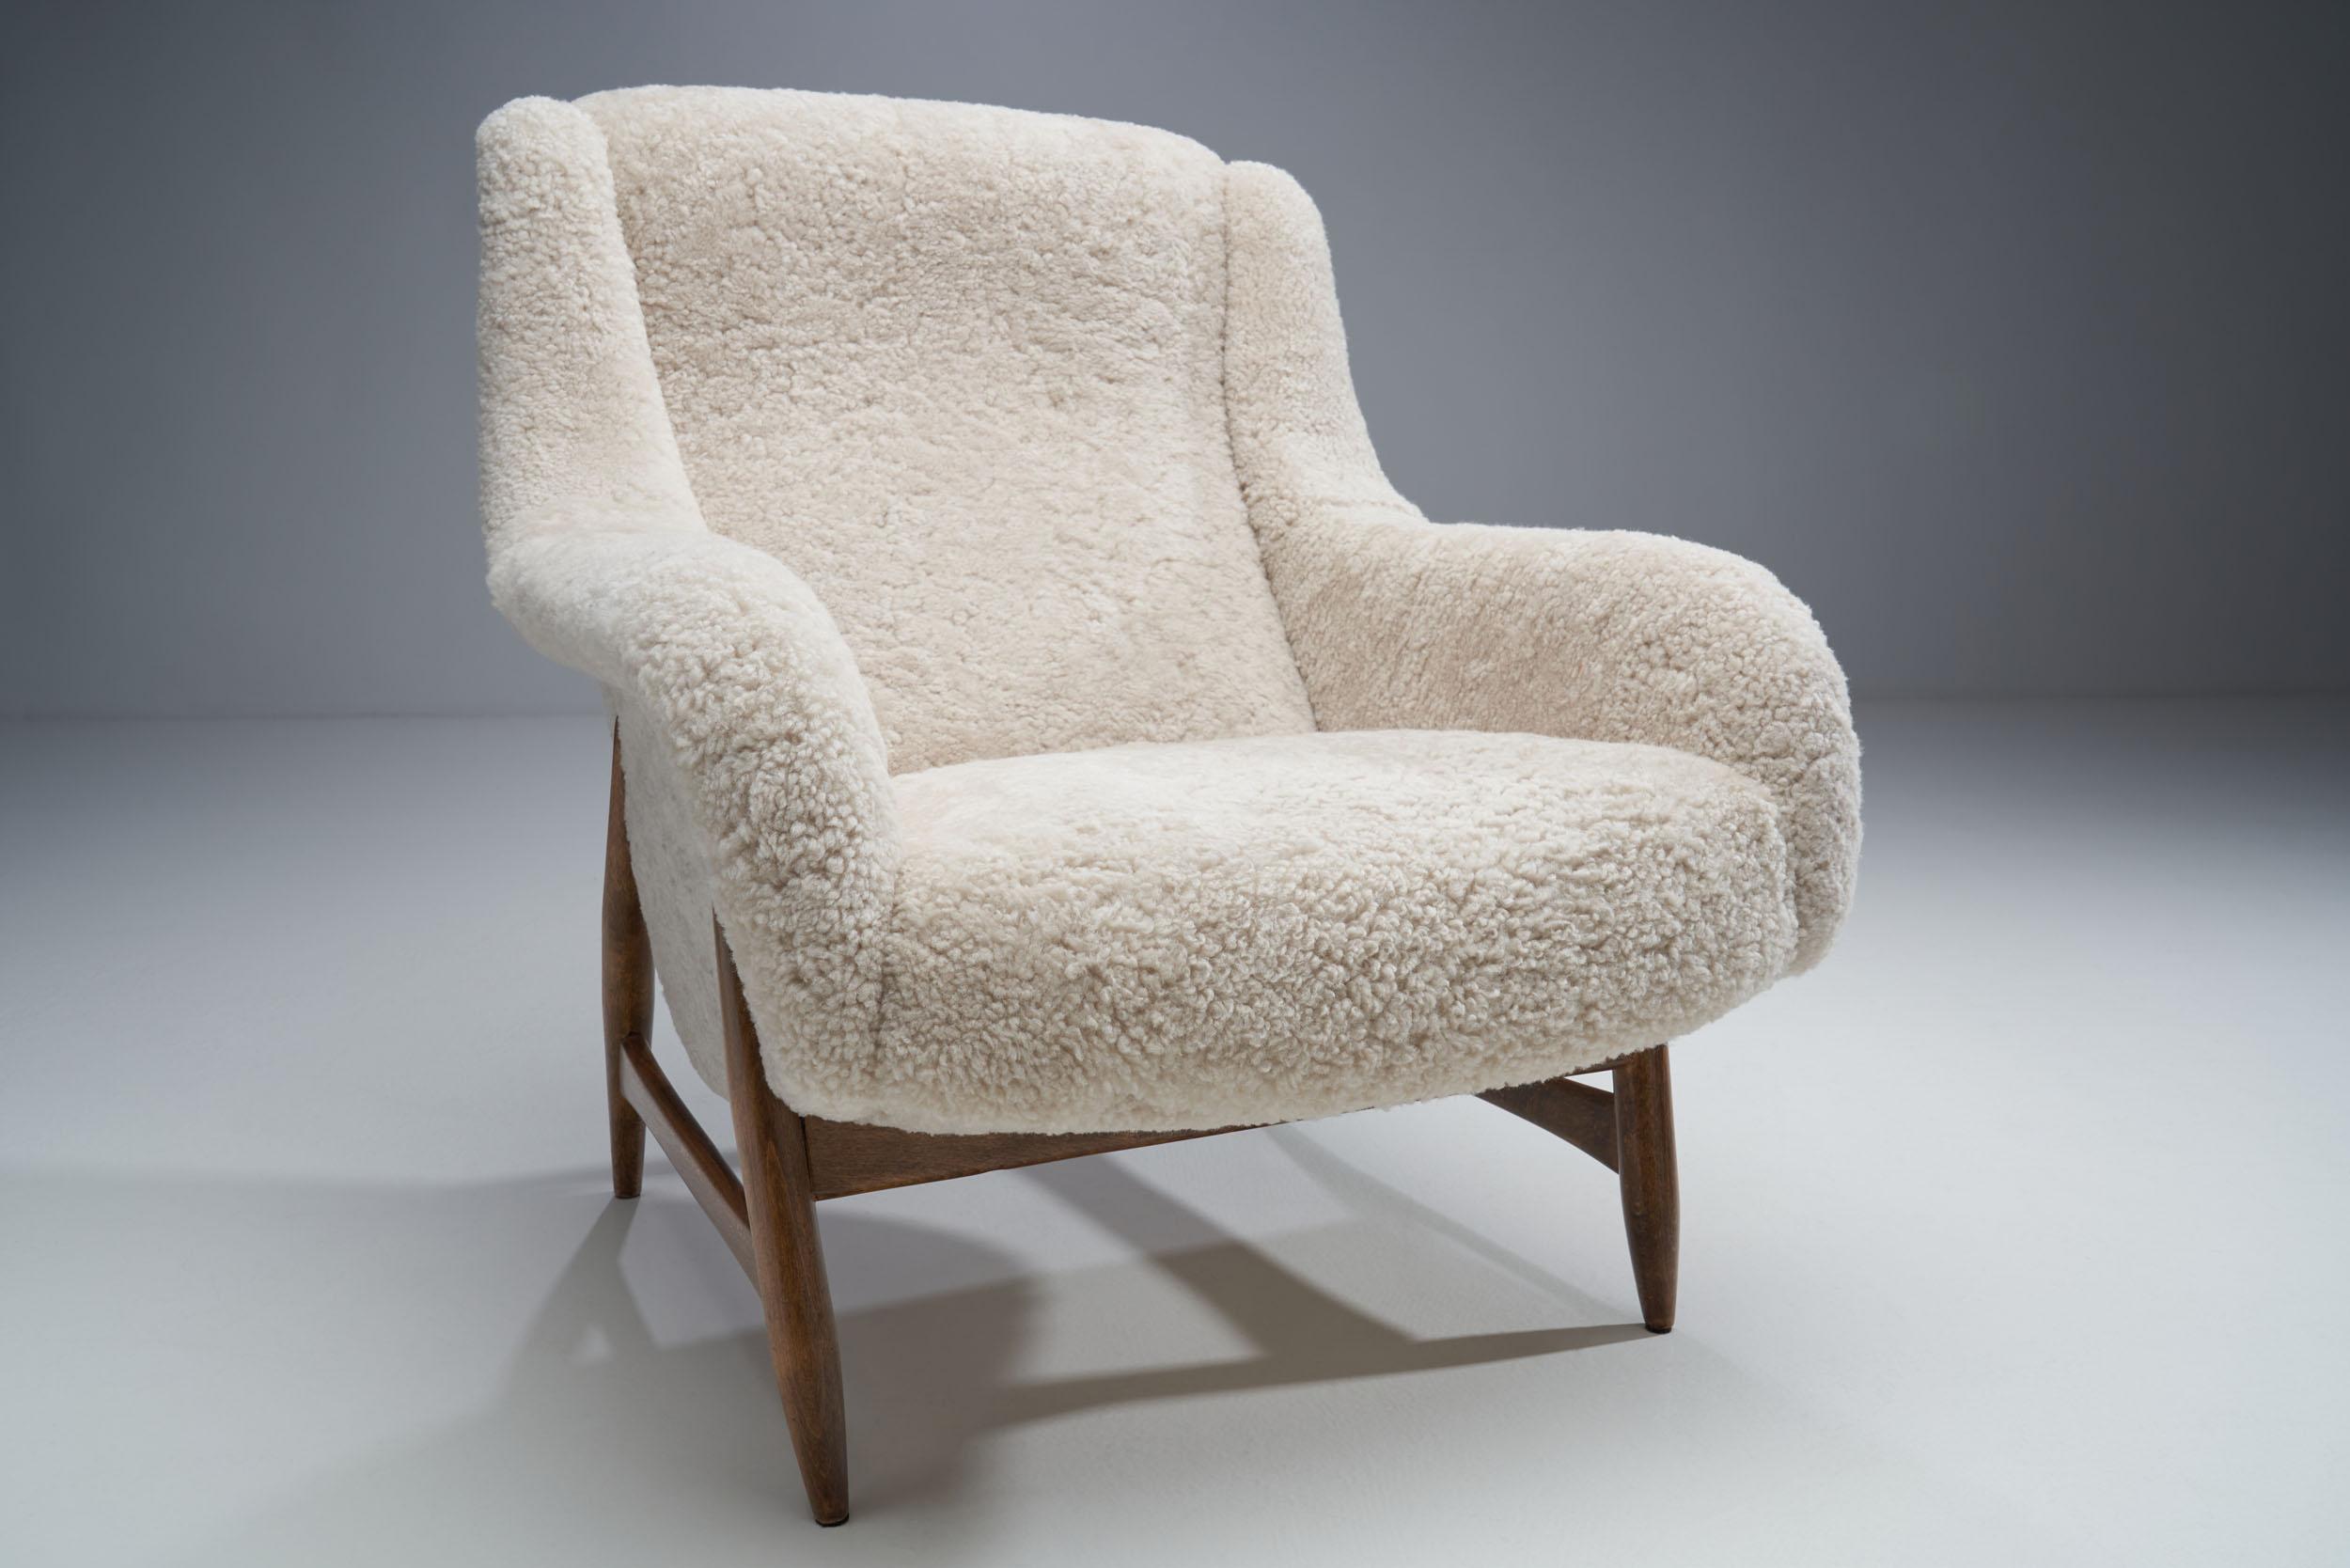 Sheepskin Rare Lounge Chair by Bengt Ruda for Artifort, The Netherlands 1960s